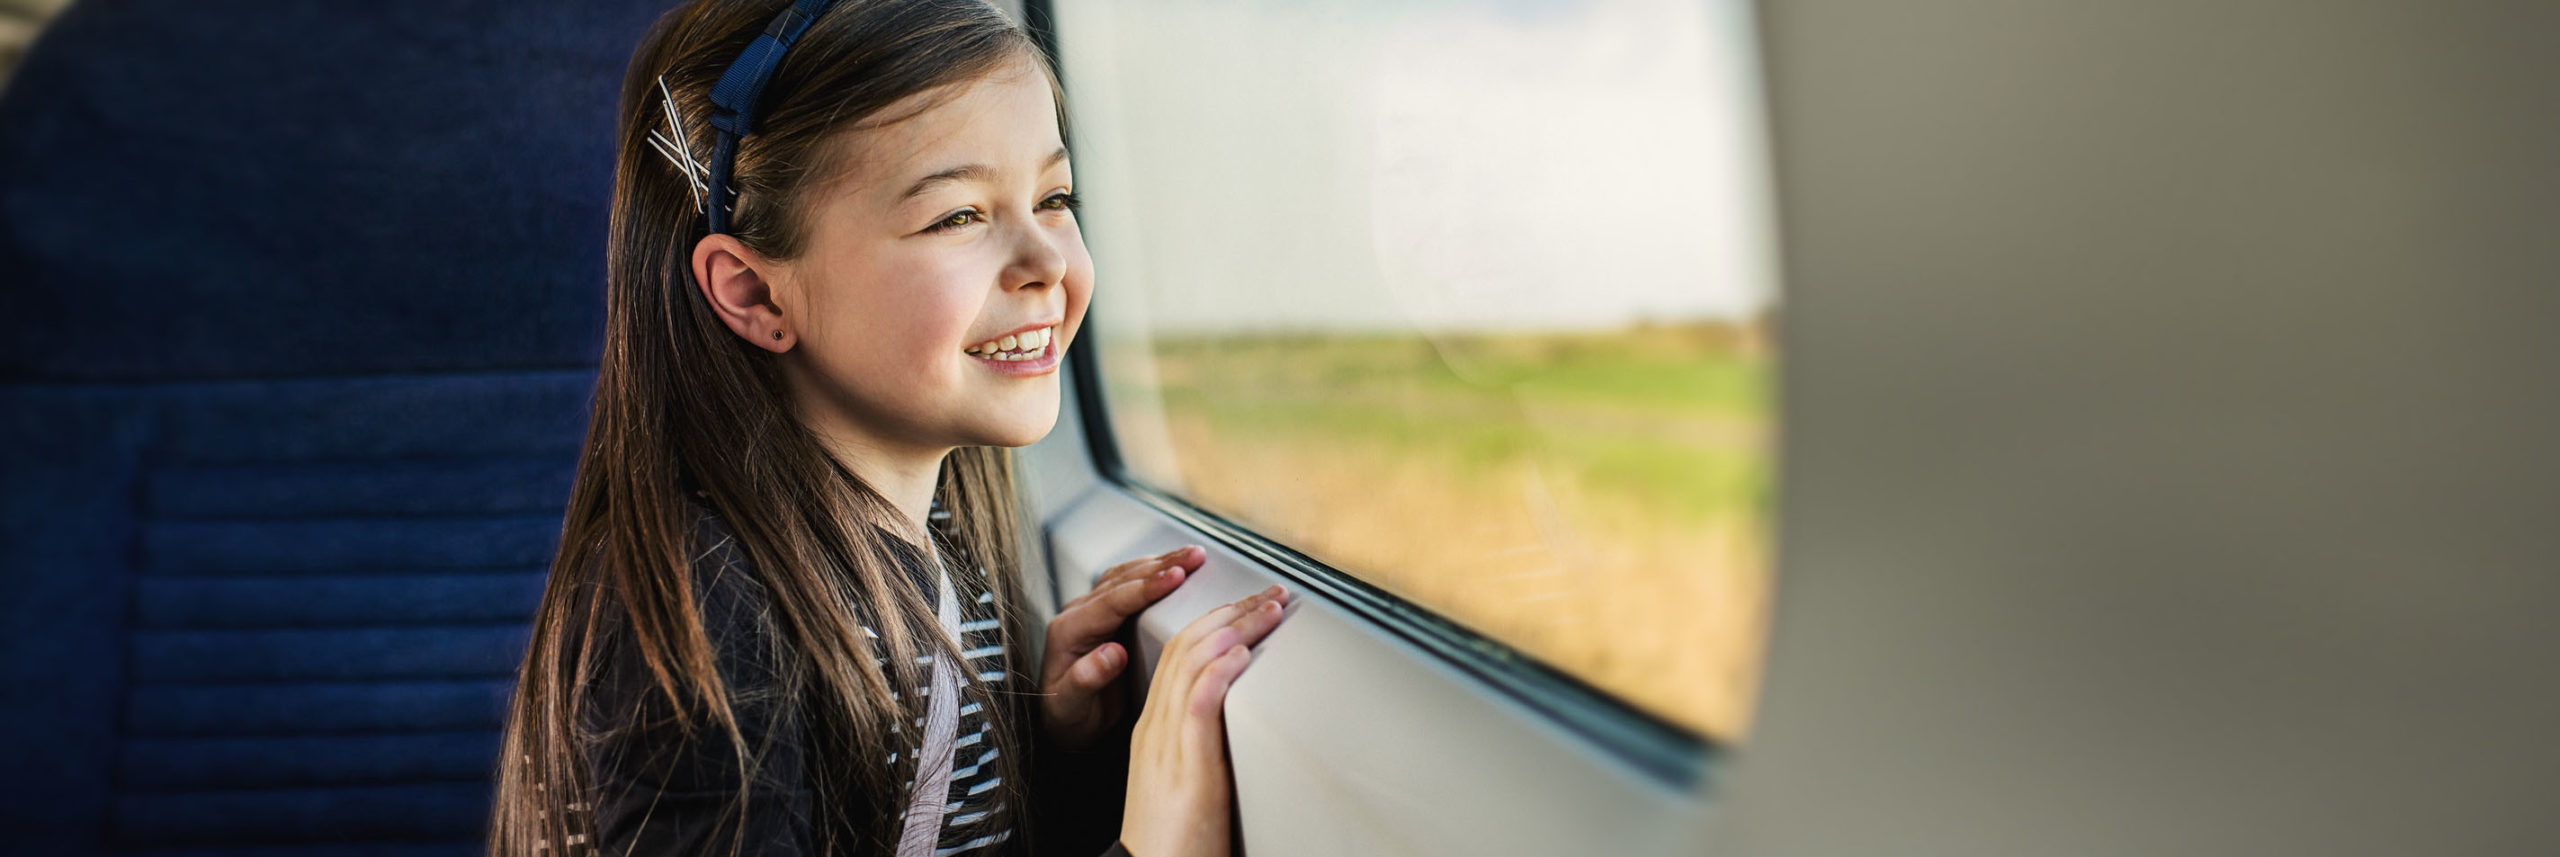 A smiling young passenger on a train